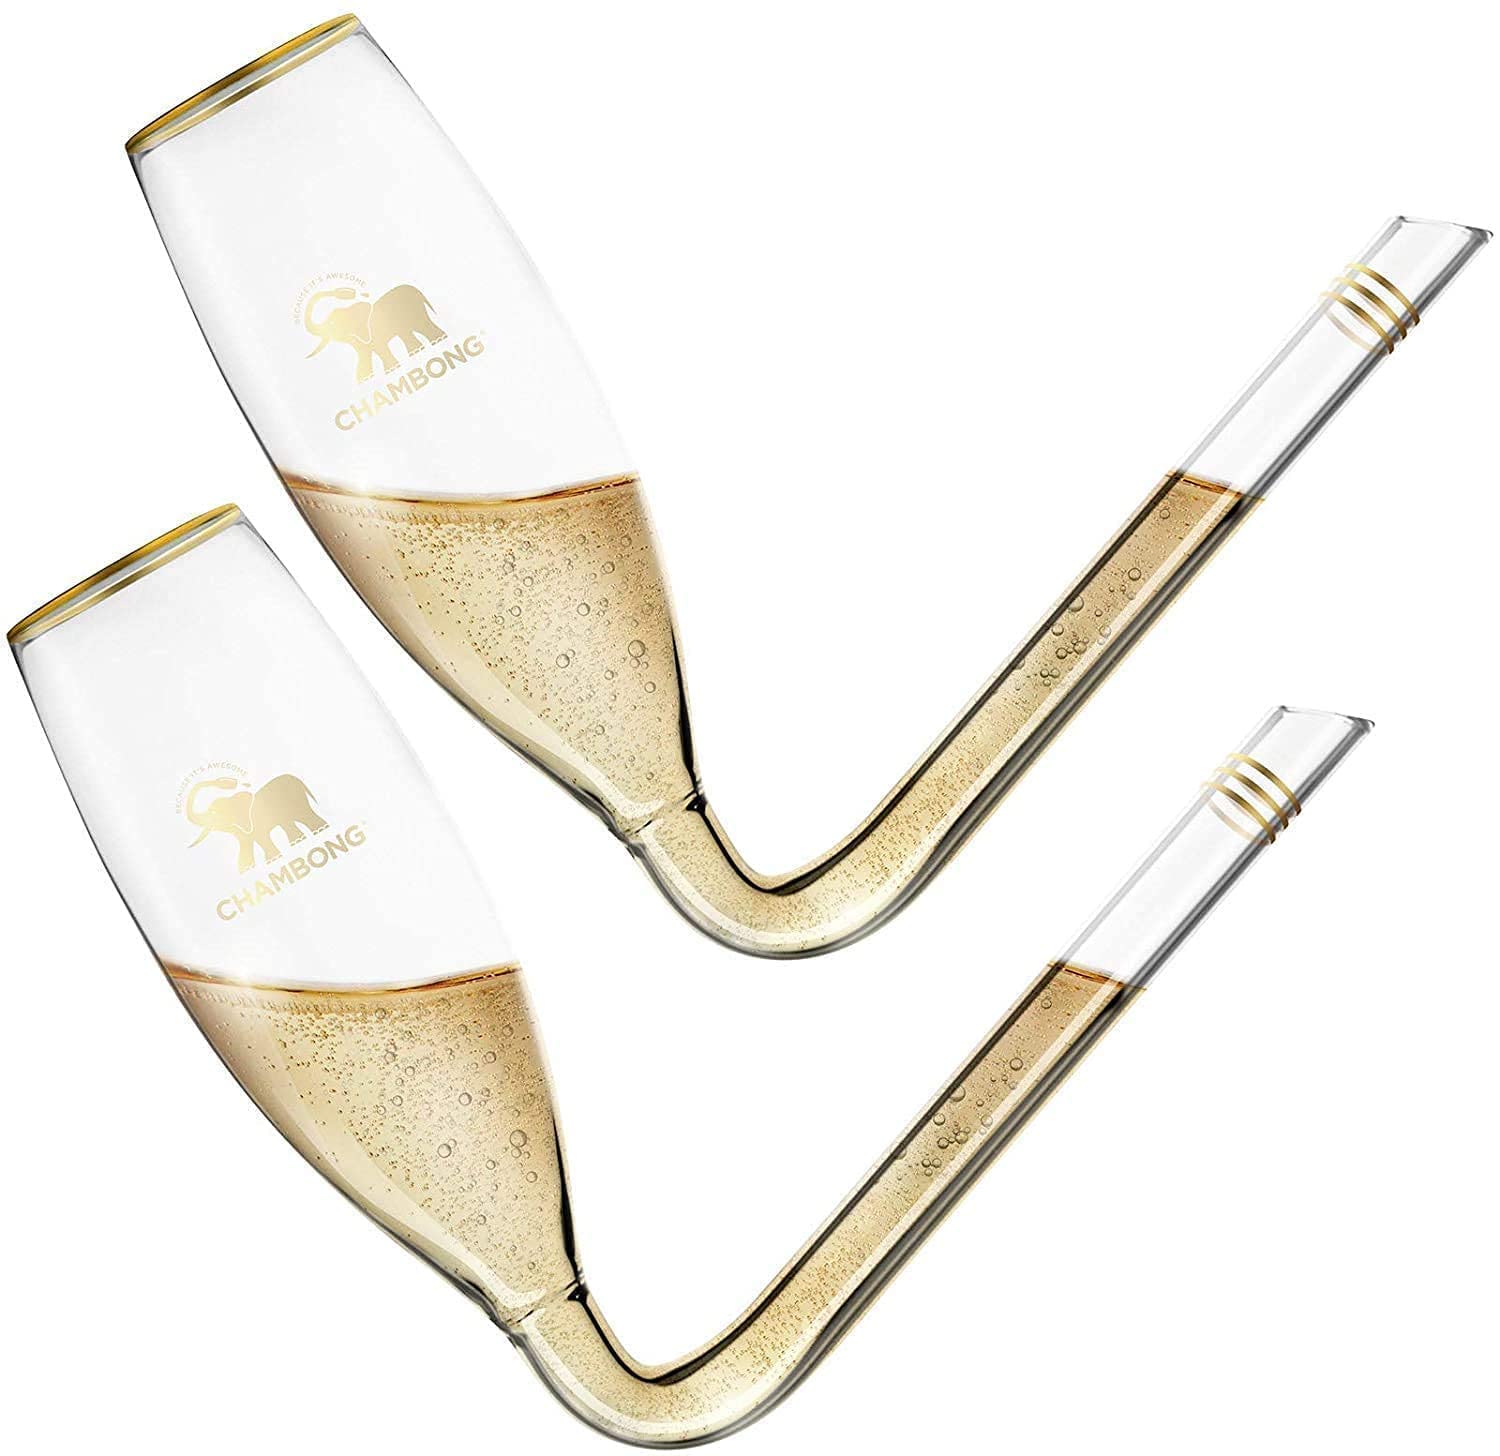 Chambong - Champagne Flute Party Set - 2 Glass Champagne Shooters (6 oz) & 1 Dark Wood Flute Holder (Holds 2) - Perfect for Bachelorette Party Favors, Engagement Gifts & White Elephant Gifts